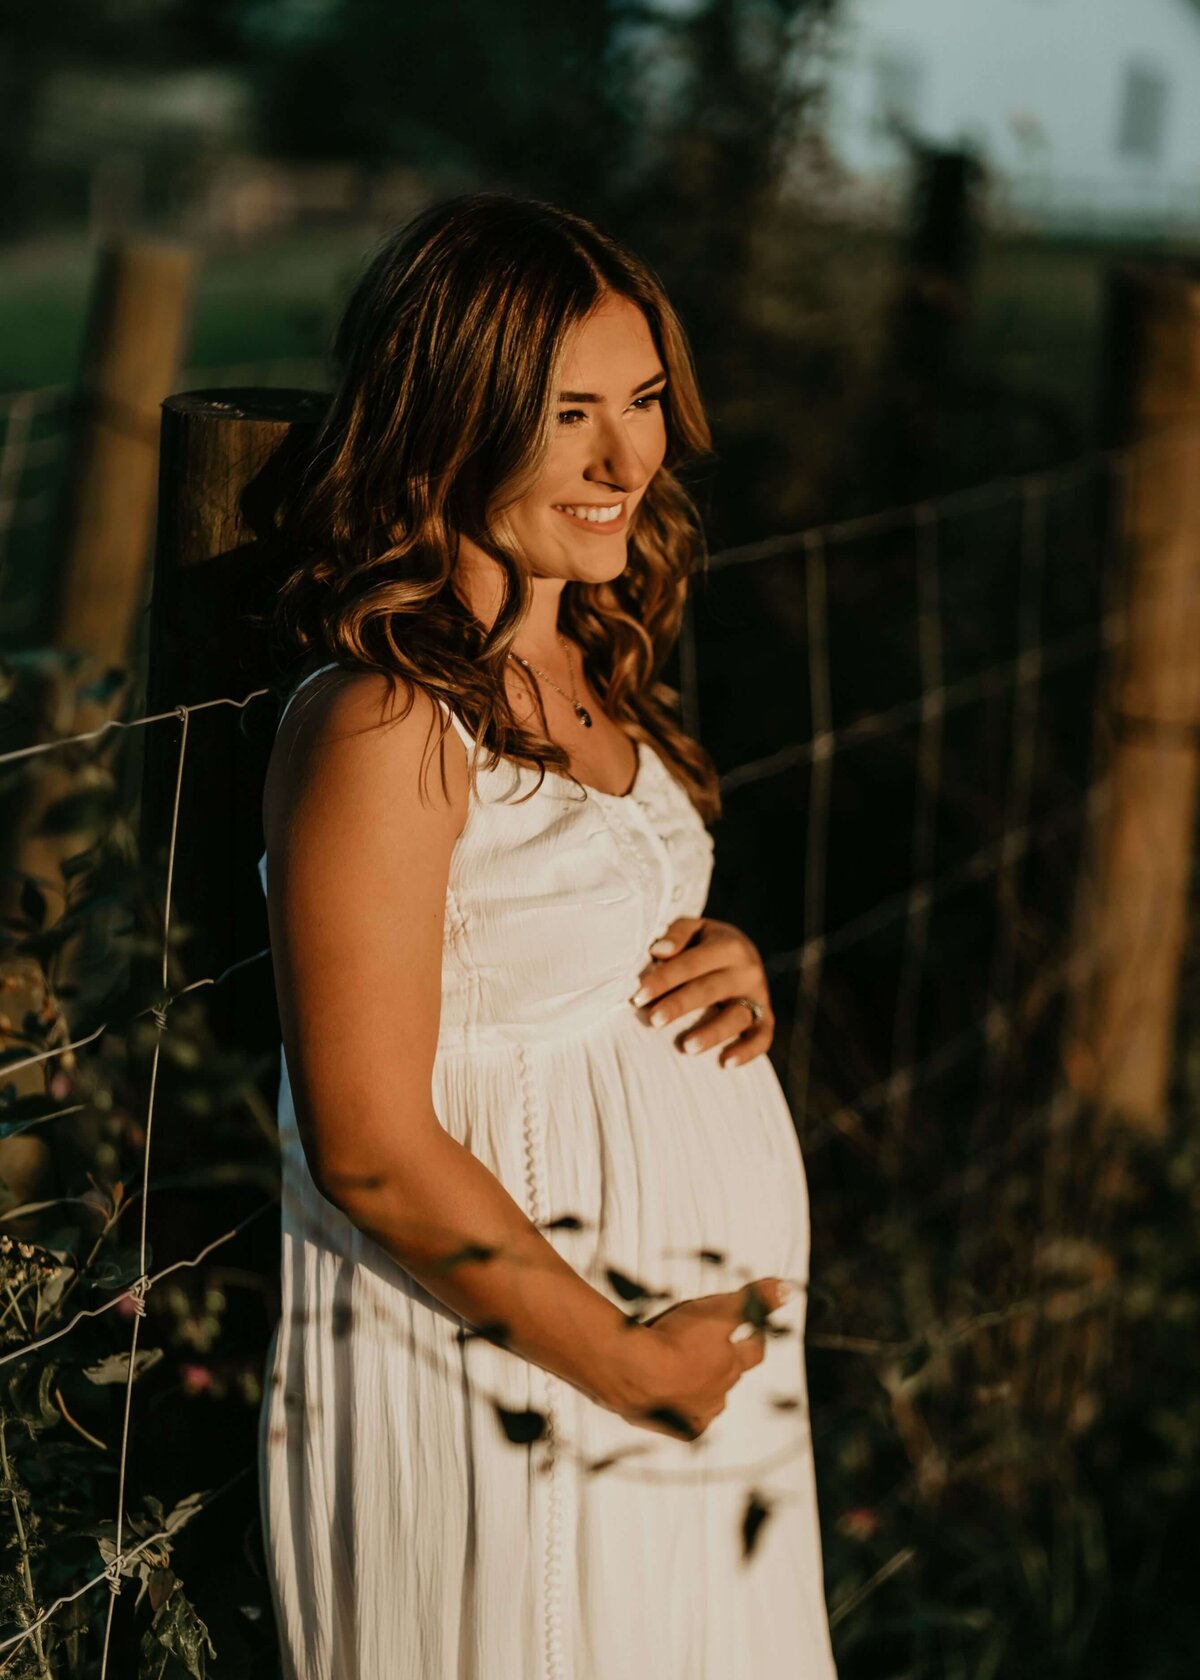 A pregnant woman in a white dress leans against a fence, beautifully captured by a Pittsburgh maternity photographer.